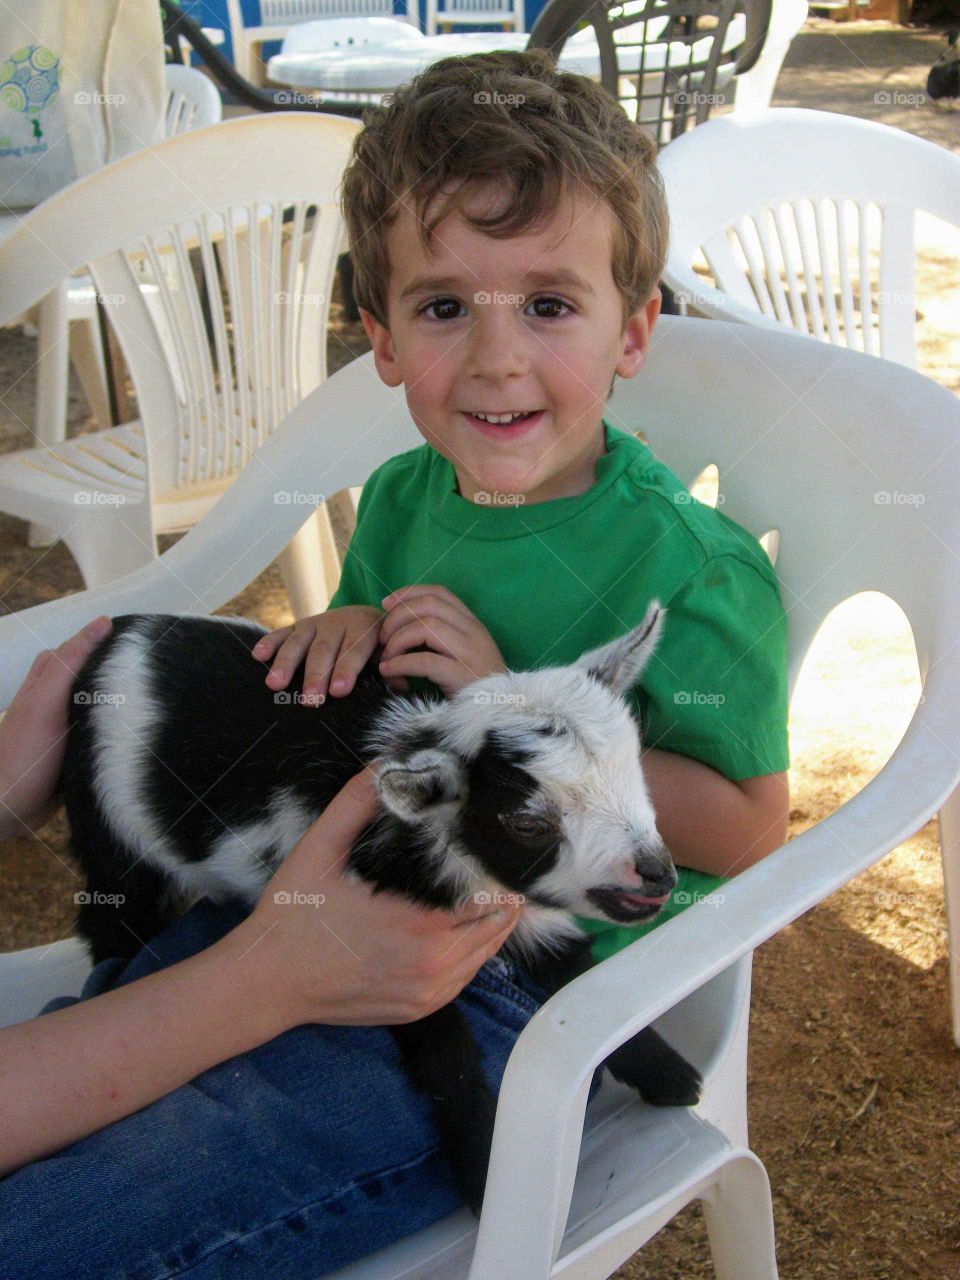 Holding a goat